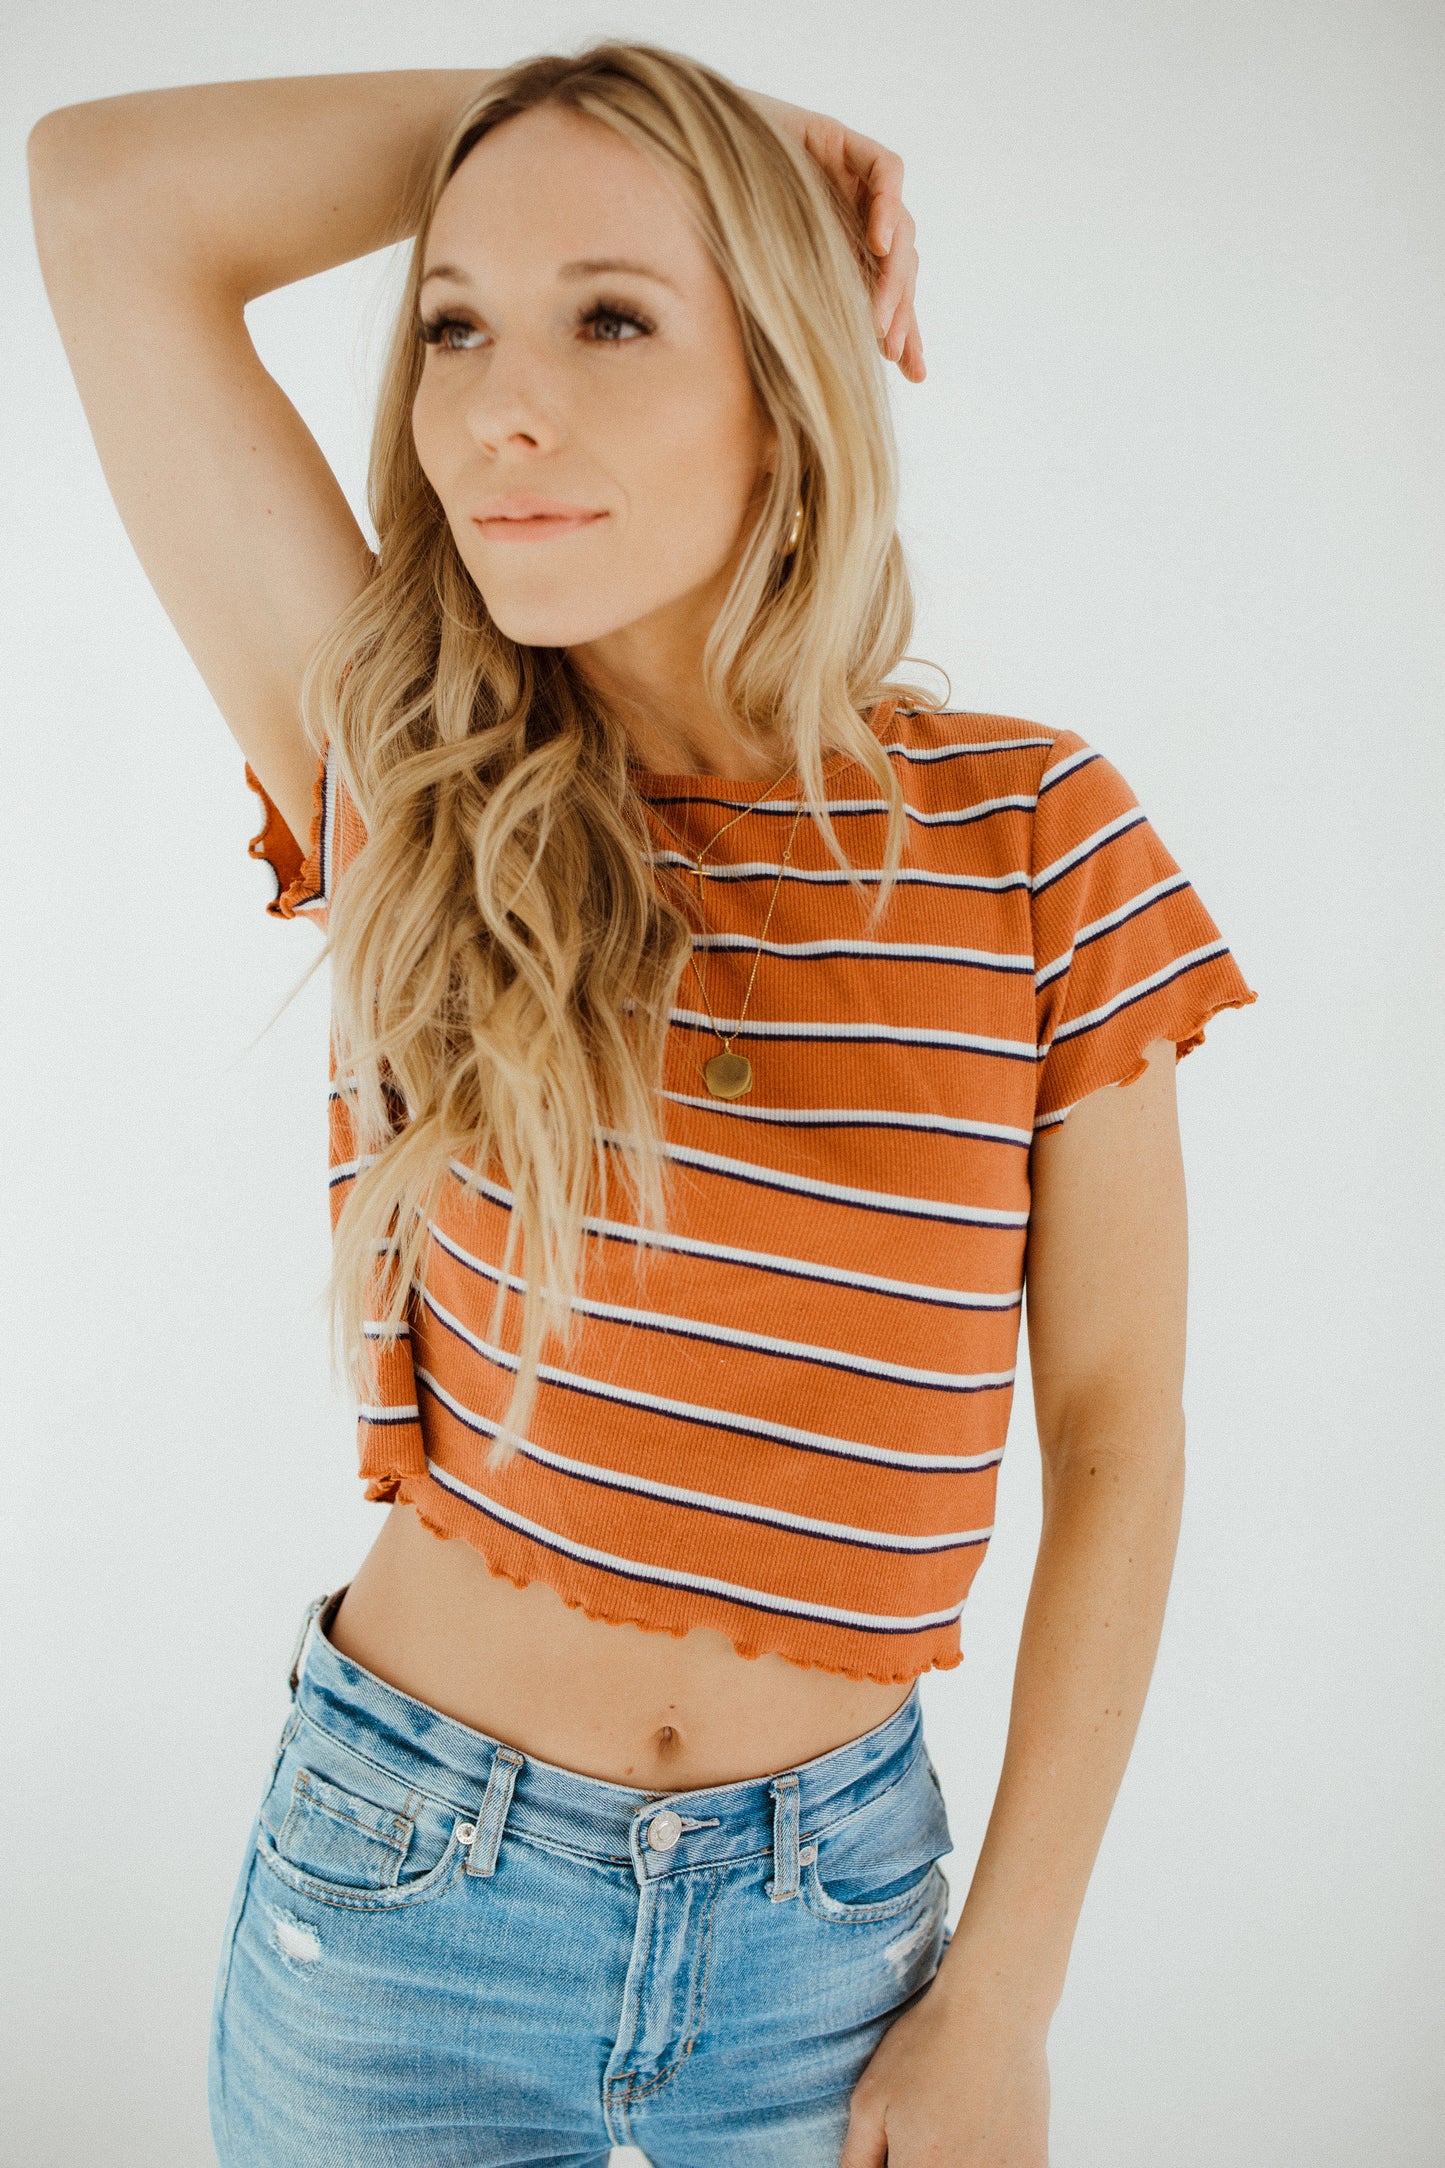 The Striped Crop Top